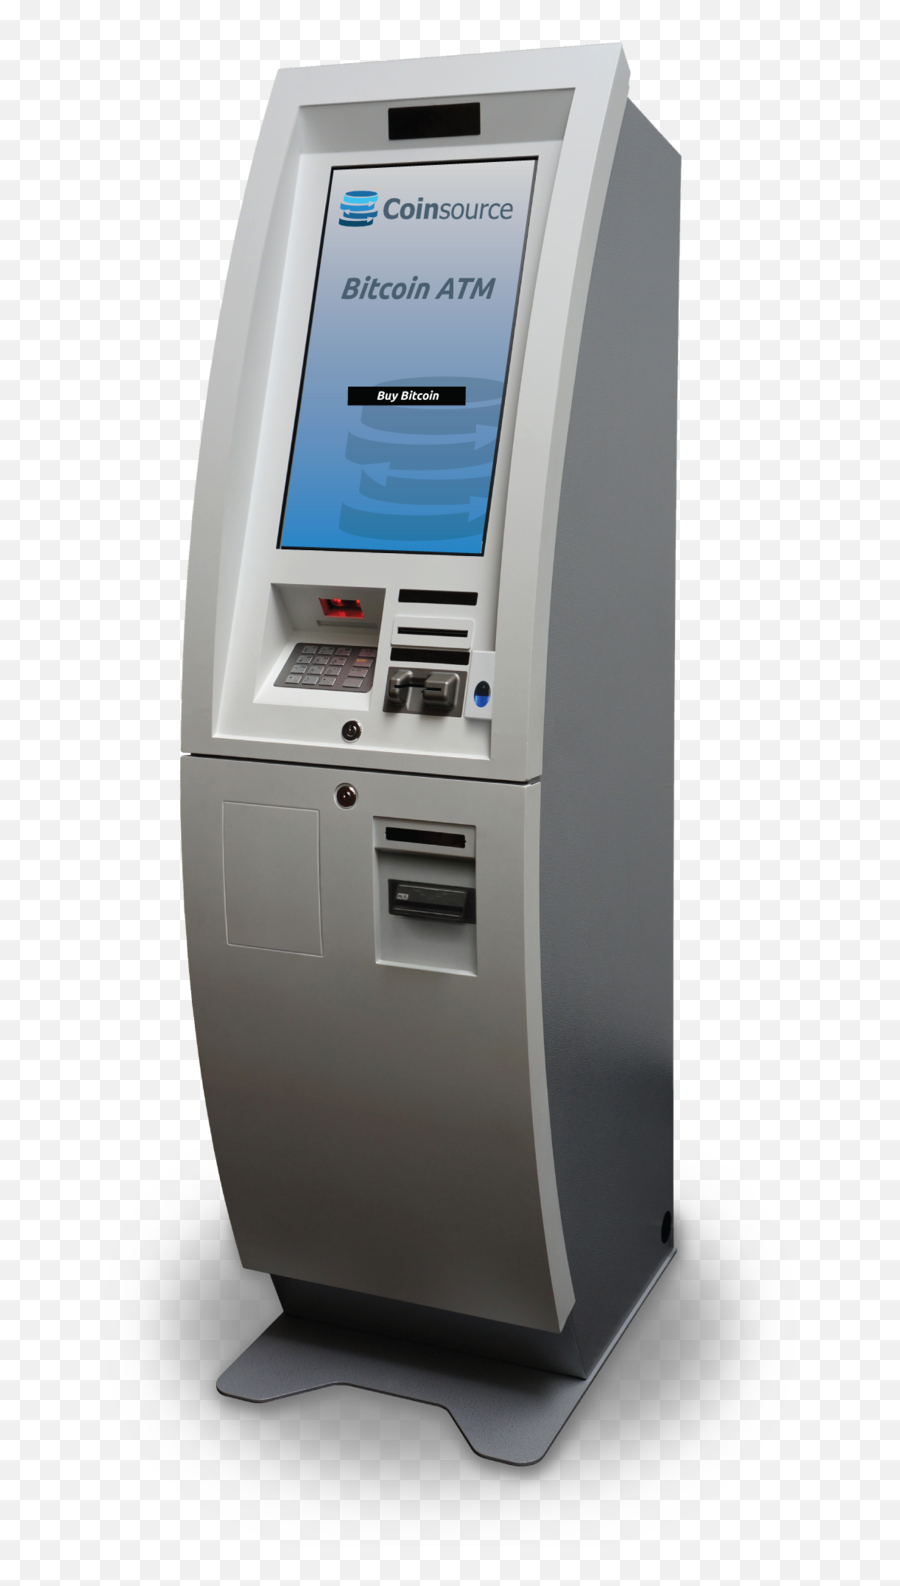 Download Coinsource Atm Png Image With - Coinsource Bitcoin Atm,Atm Png